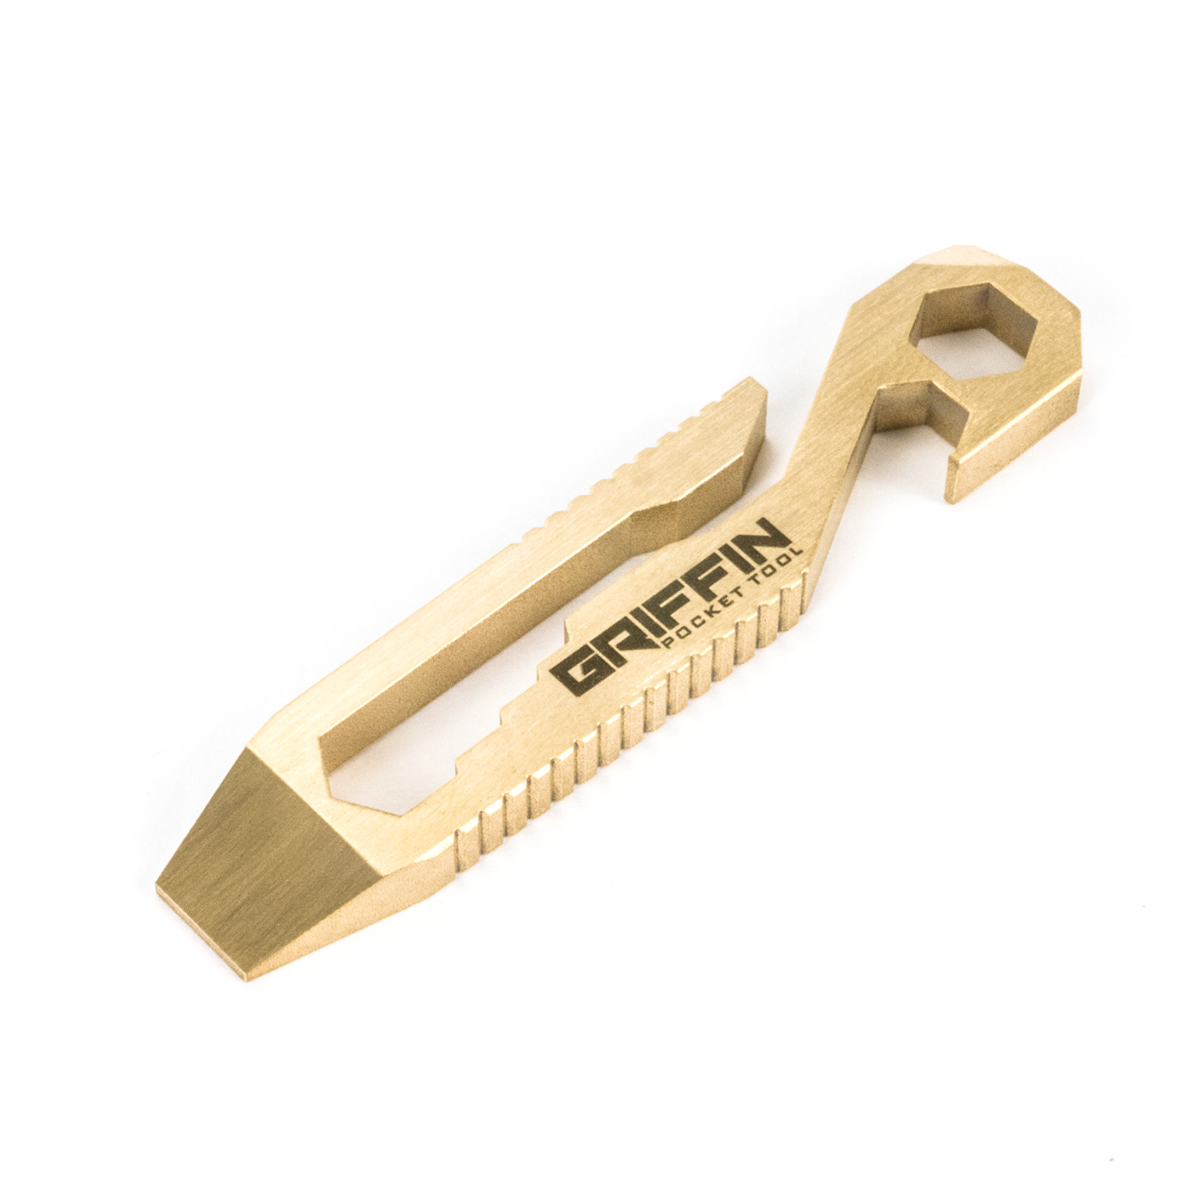 Griffin Pocket Tool | Think Outside The Toolbox®